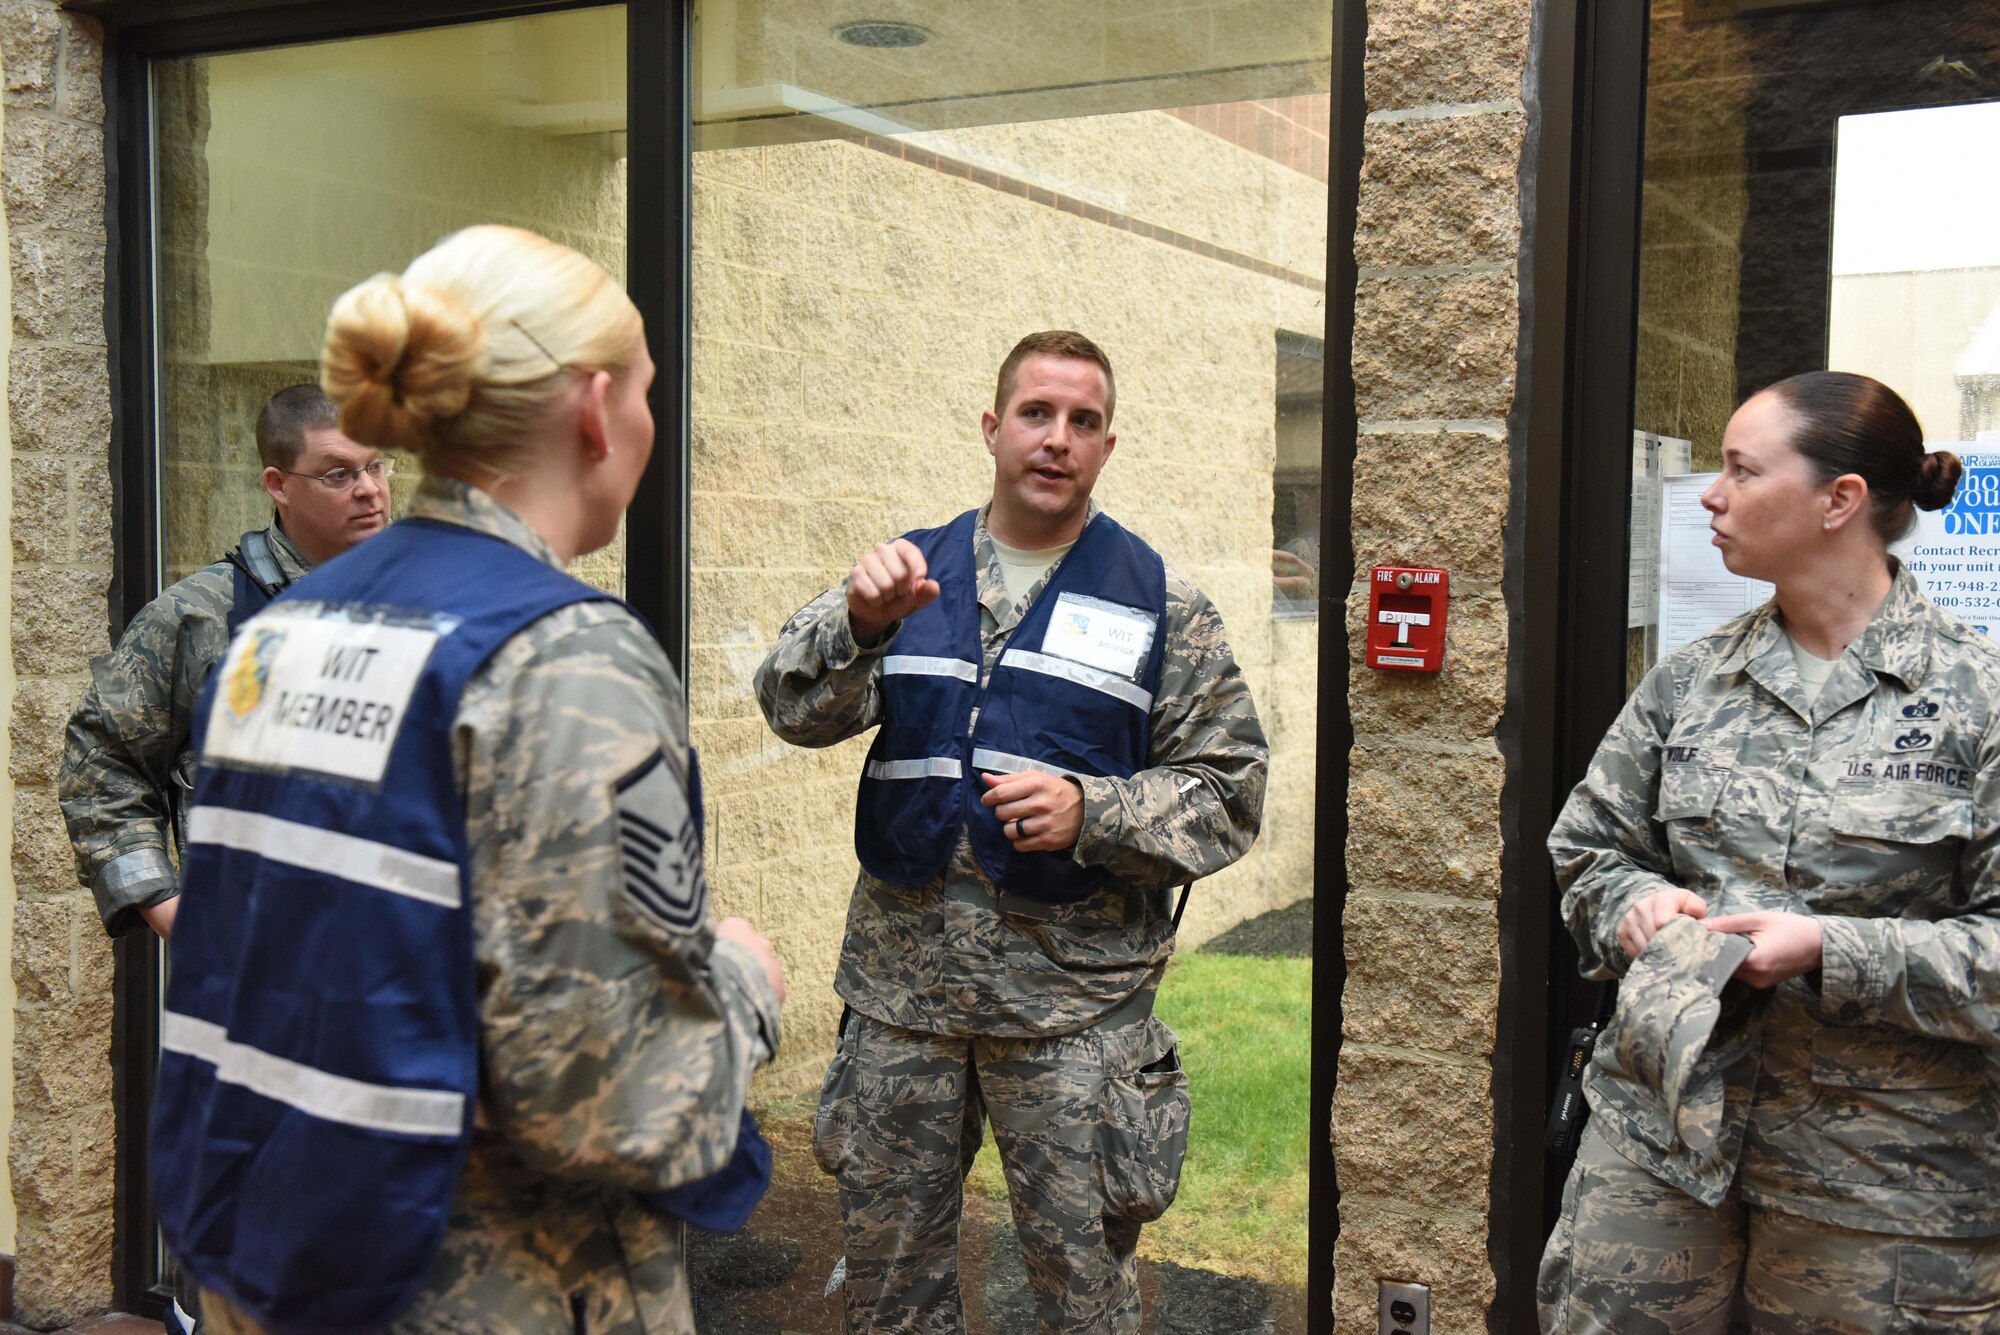 Tech. Sgt. Jordan Sherman, 193rd Special Operations Wing, Security Forces Squadron, alternate wing anti-terrorism officer, speaks with wing inspection team members to get their feedback on the inspection of building 79 during the active shooter exercise on base, May 25, 2017. The exercise was conducted as part of base readiness to test wing members’ ability to react properly in the situation of an active shooter. (U.S. Air National Guard photo by Tech. Sgt. Claire Behney/Released)